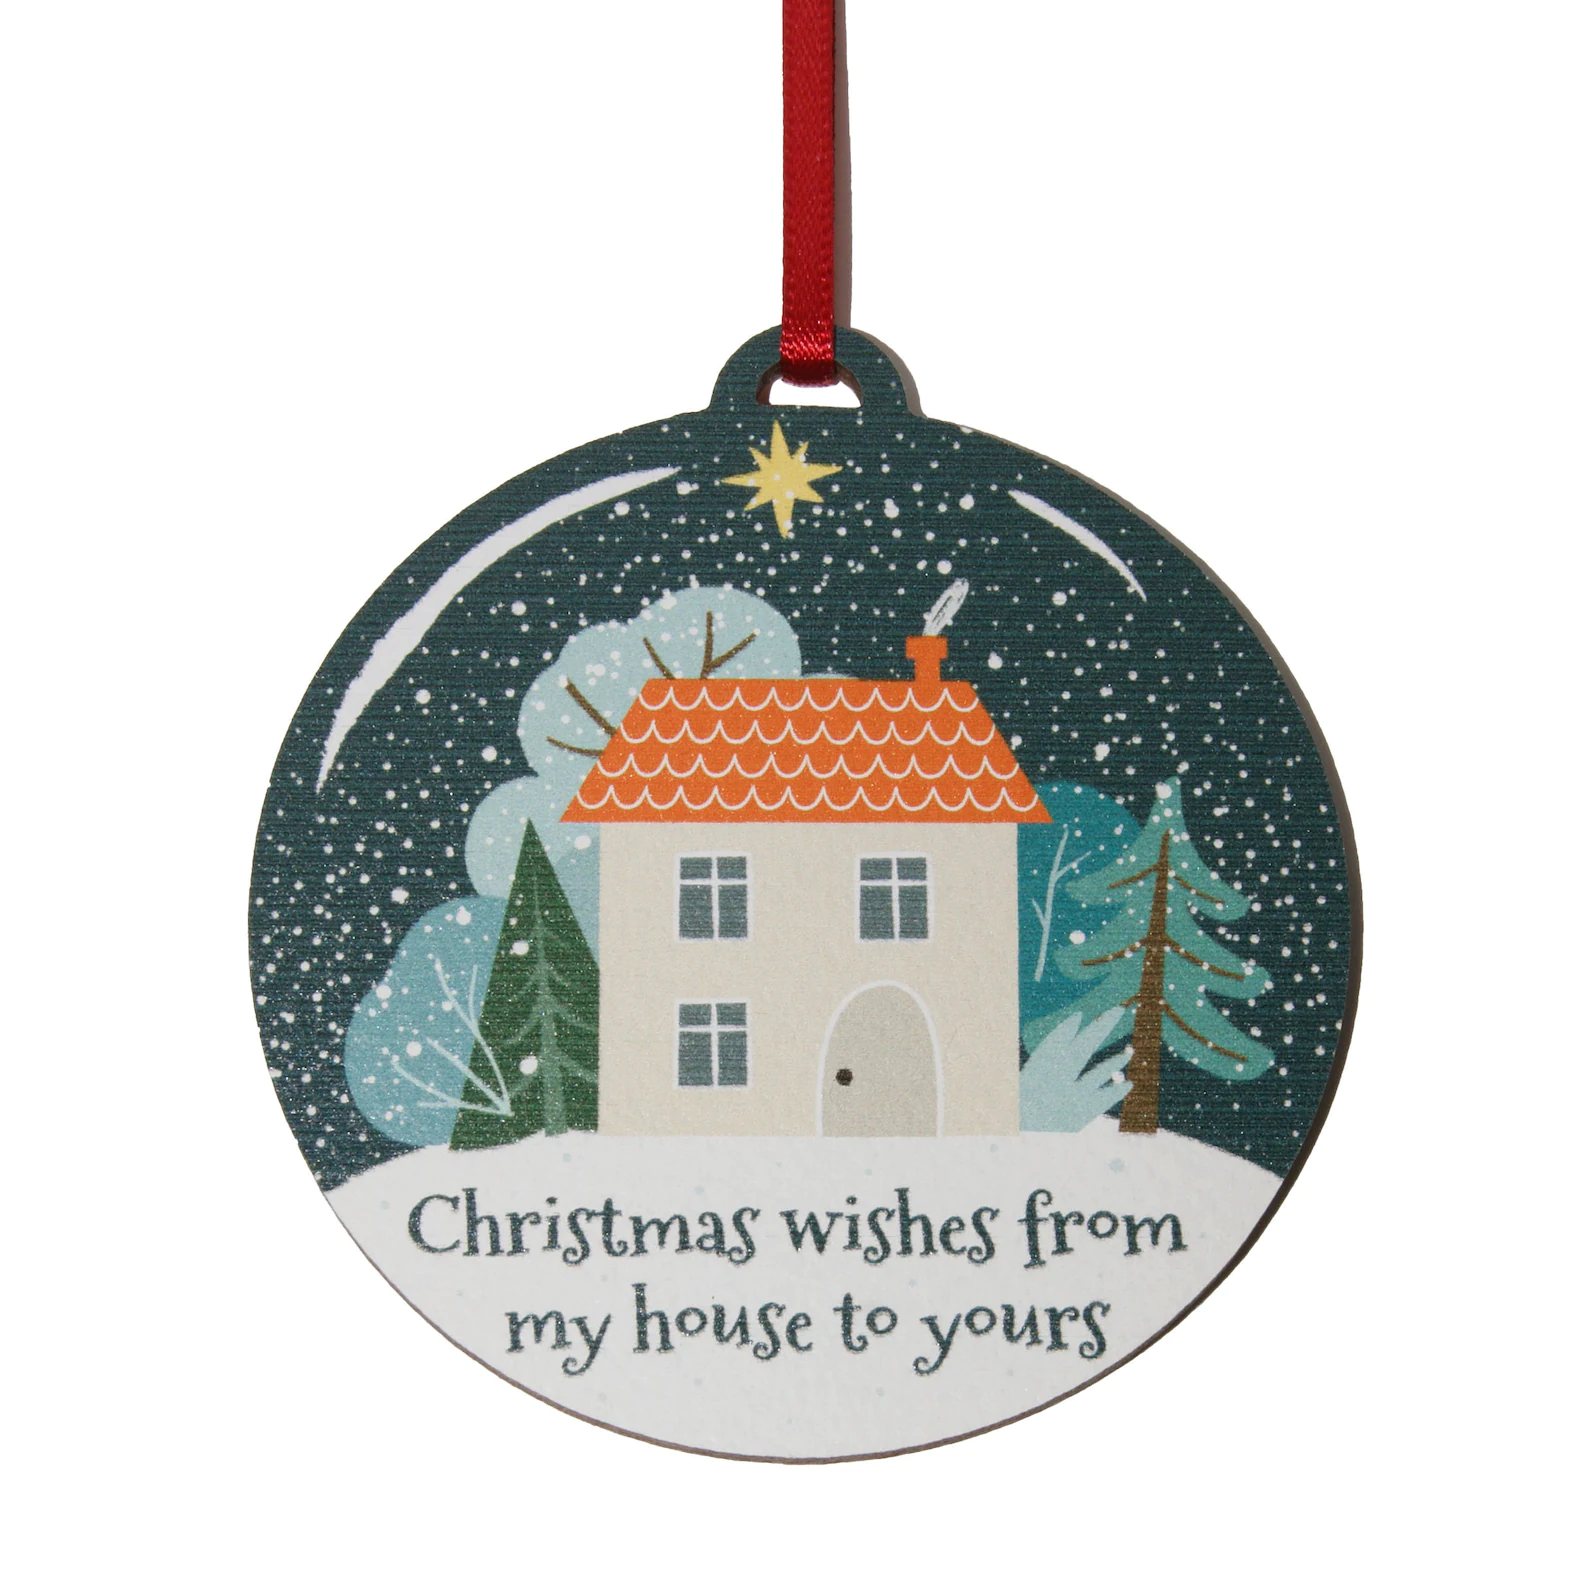 Christmas Wishes from My house to yours - 8cm wooden bauble